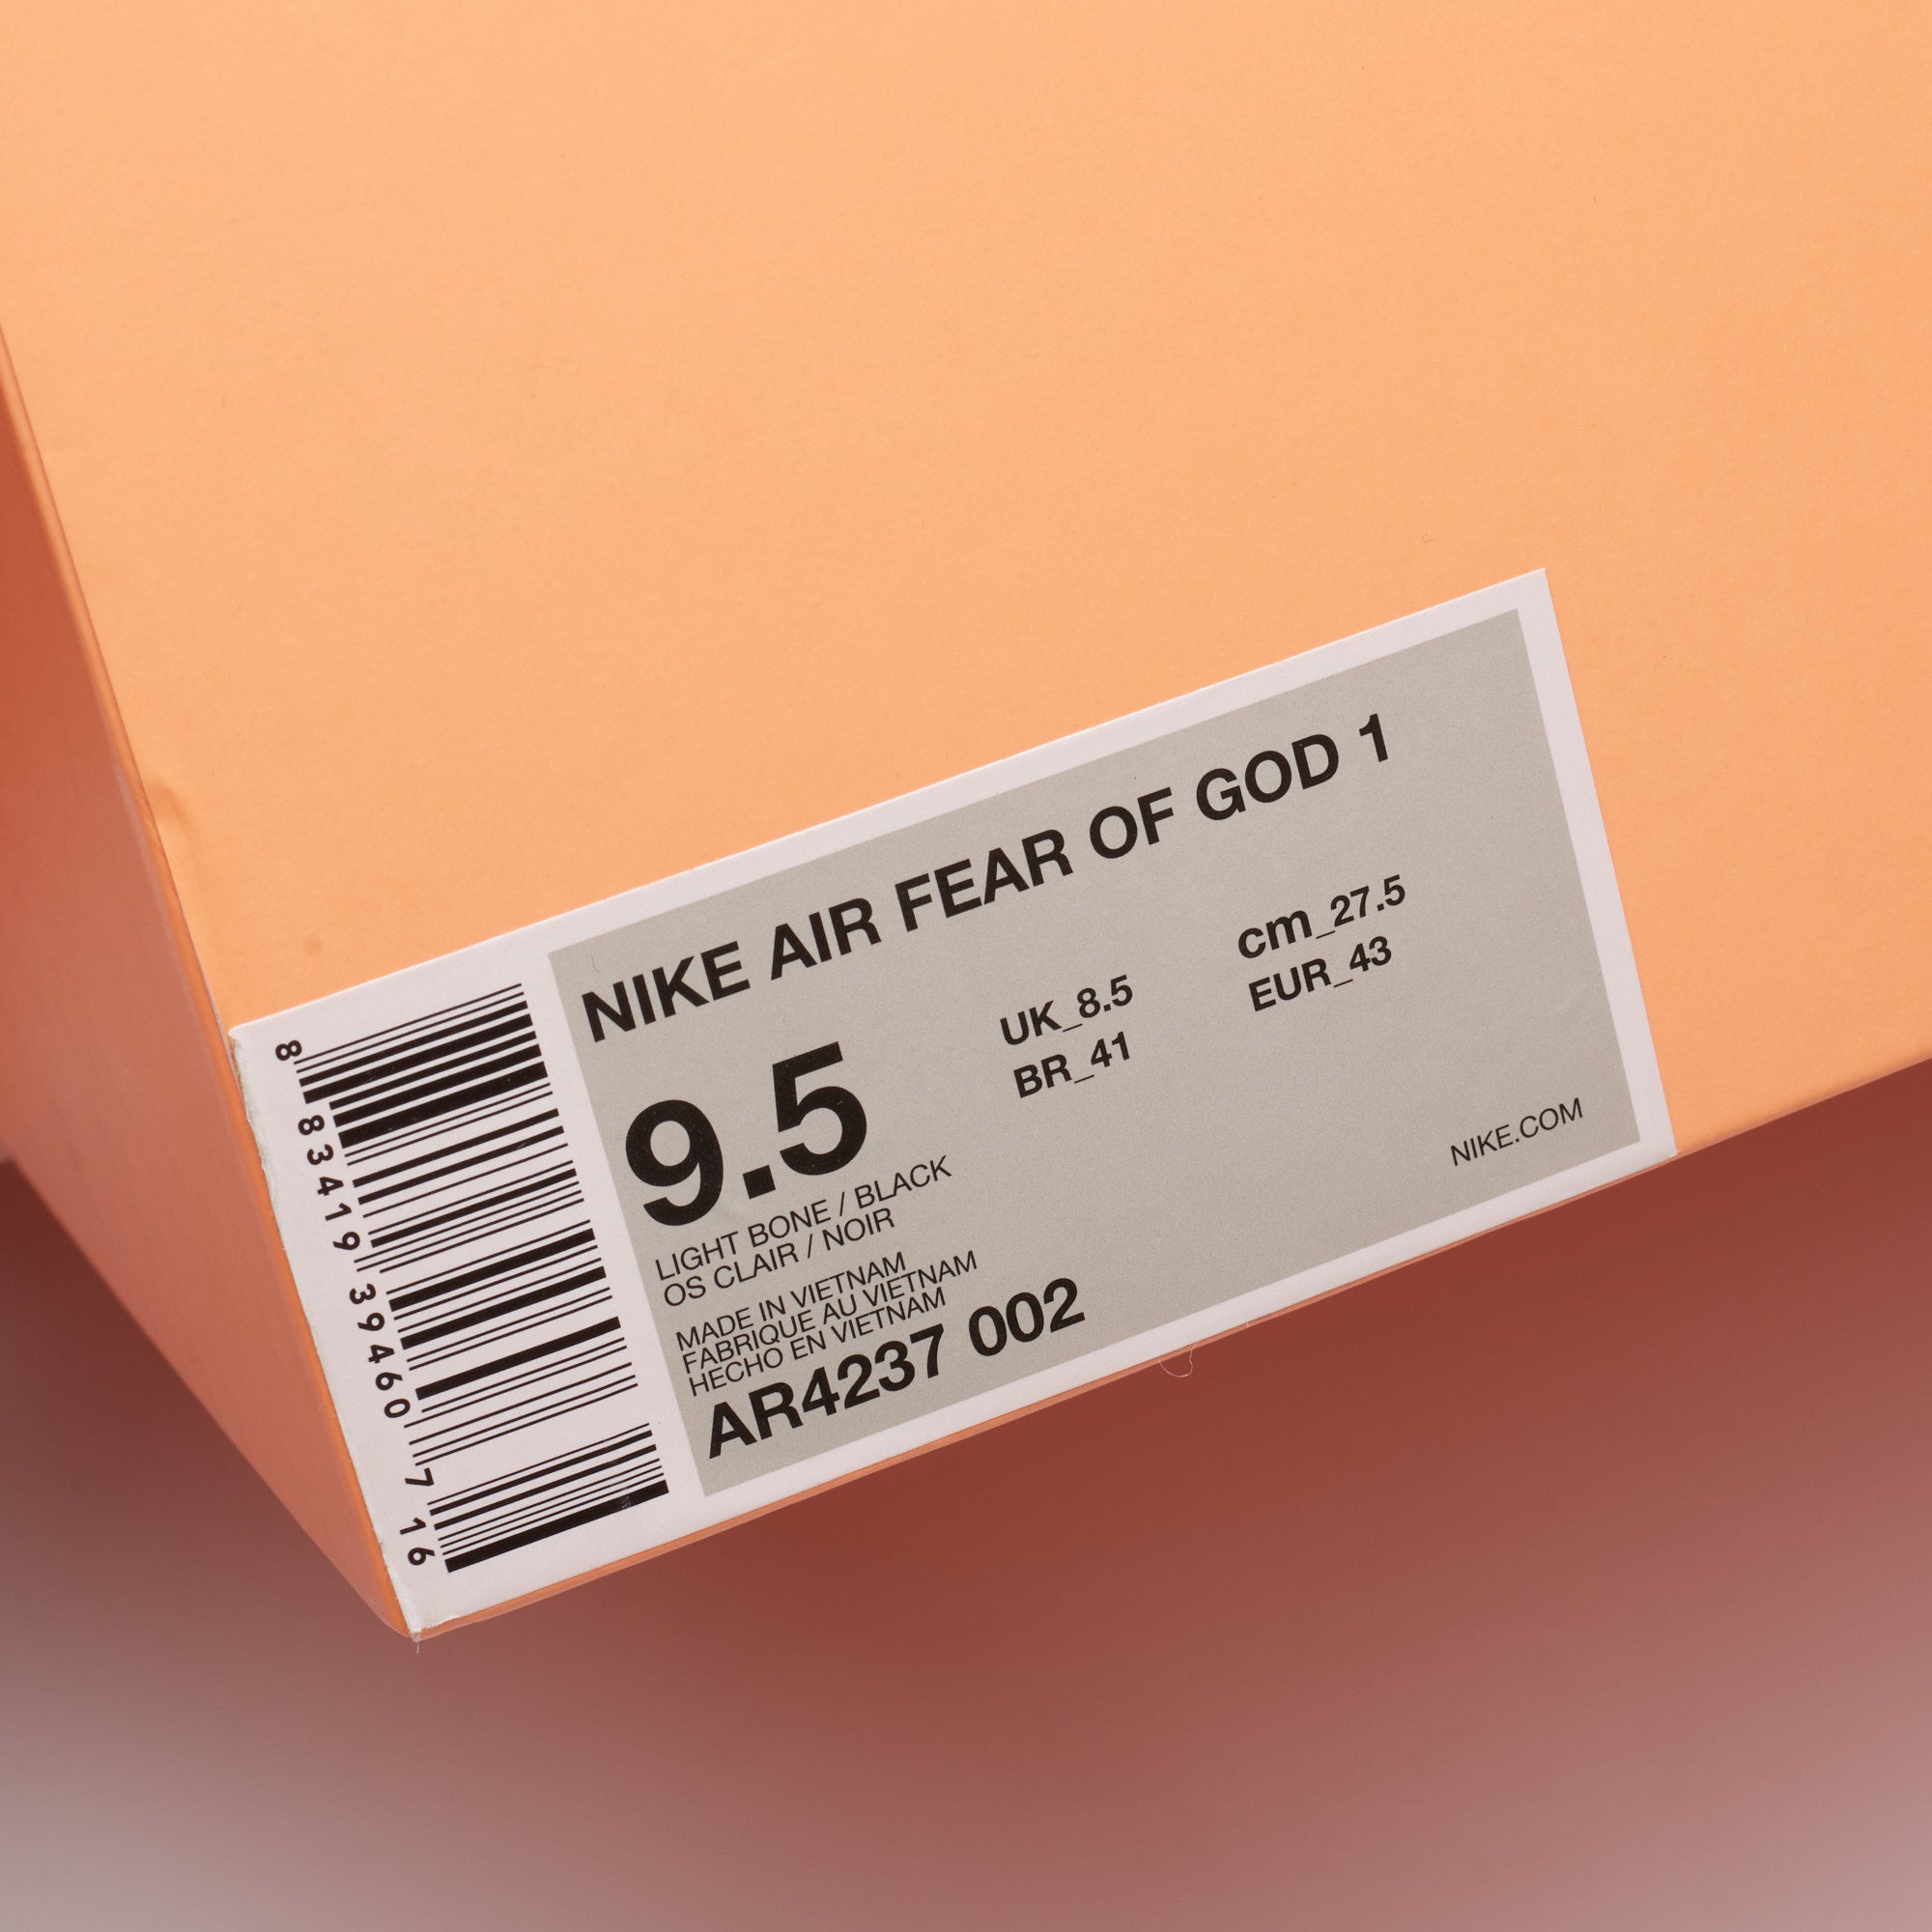 NIKE AIR x FEAR OF GOD 1 Light Bone High Top Sneakers Shoes US 9.5 NEW with Box NIKE